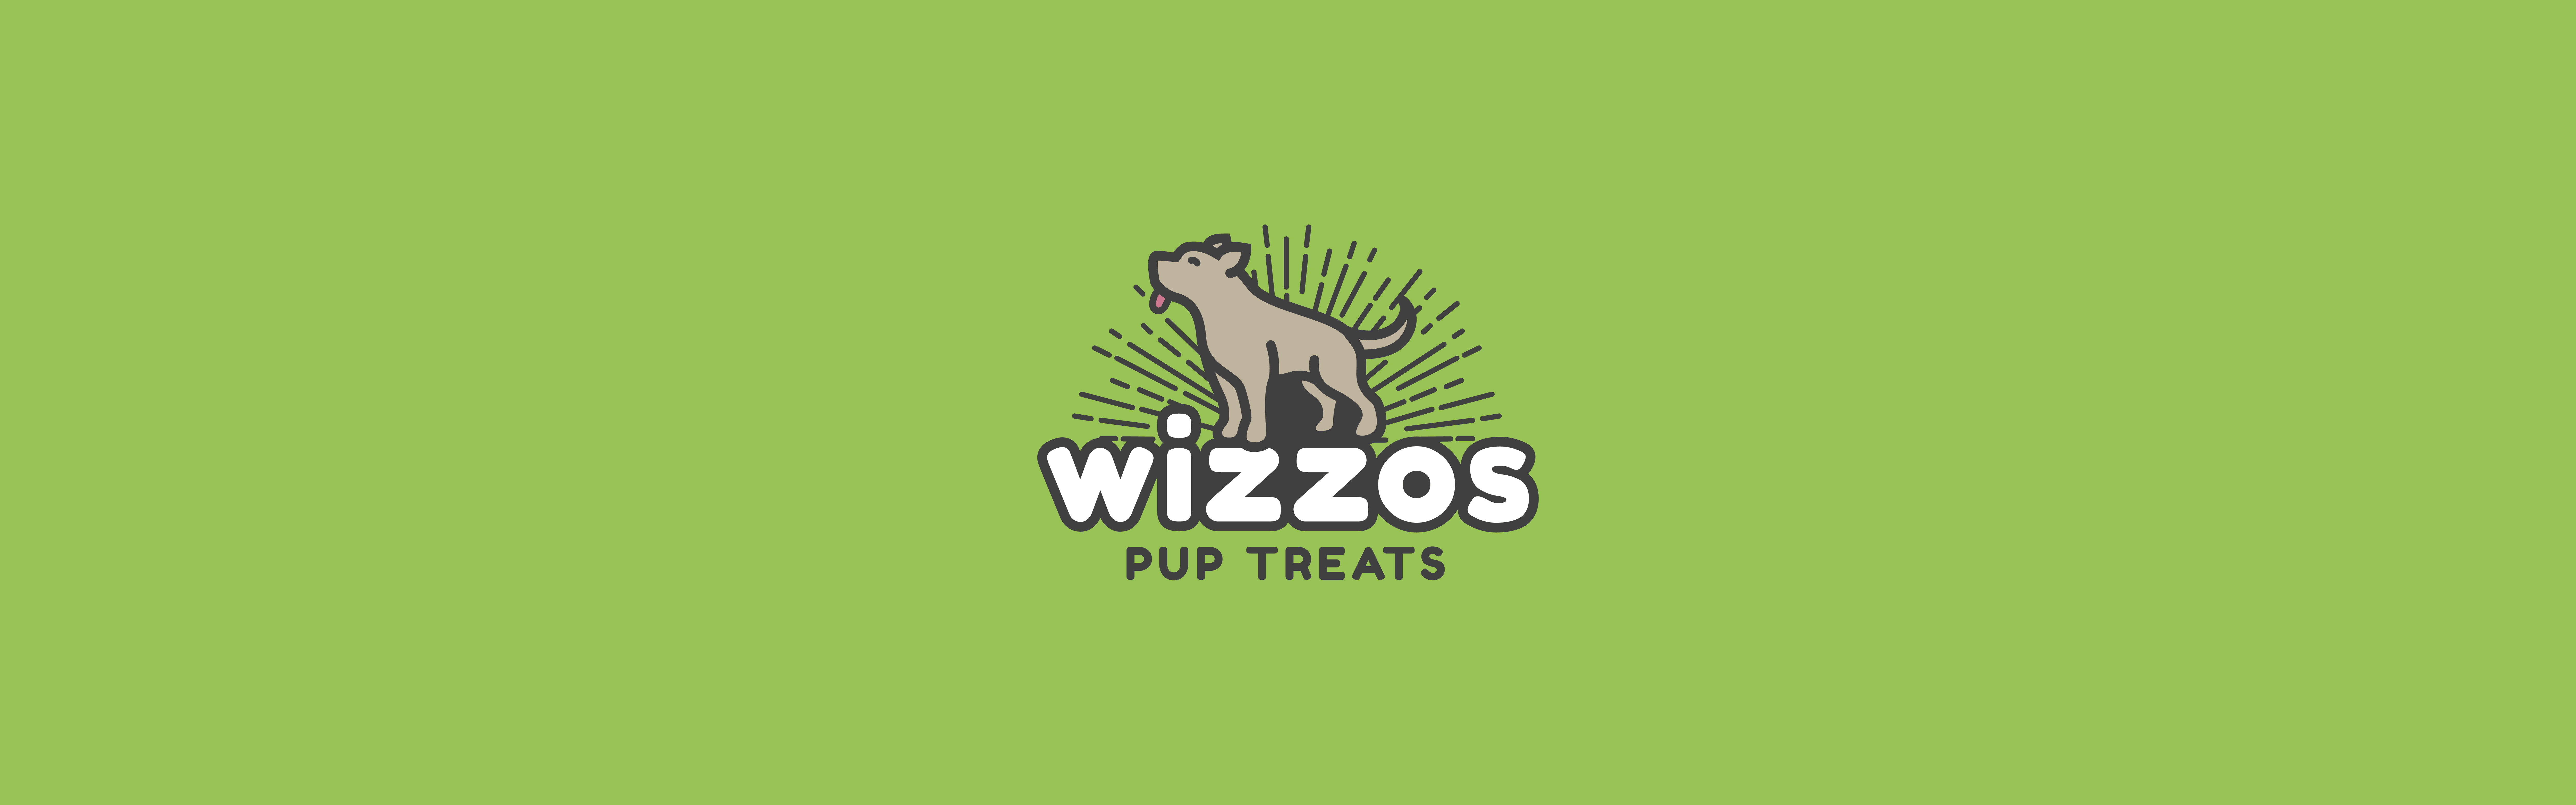 Logo of "Wizzos Pup Treats" featuring a stylized silhouette of a dog jumping above the text, set against a green background.